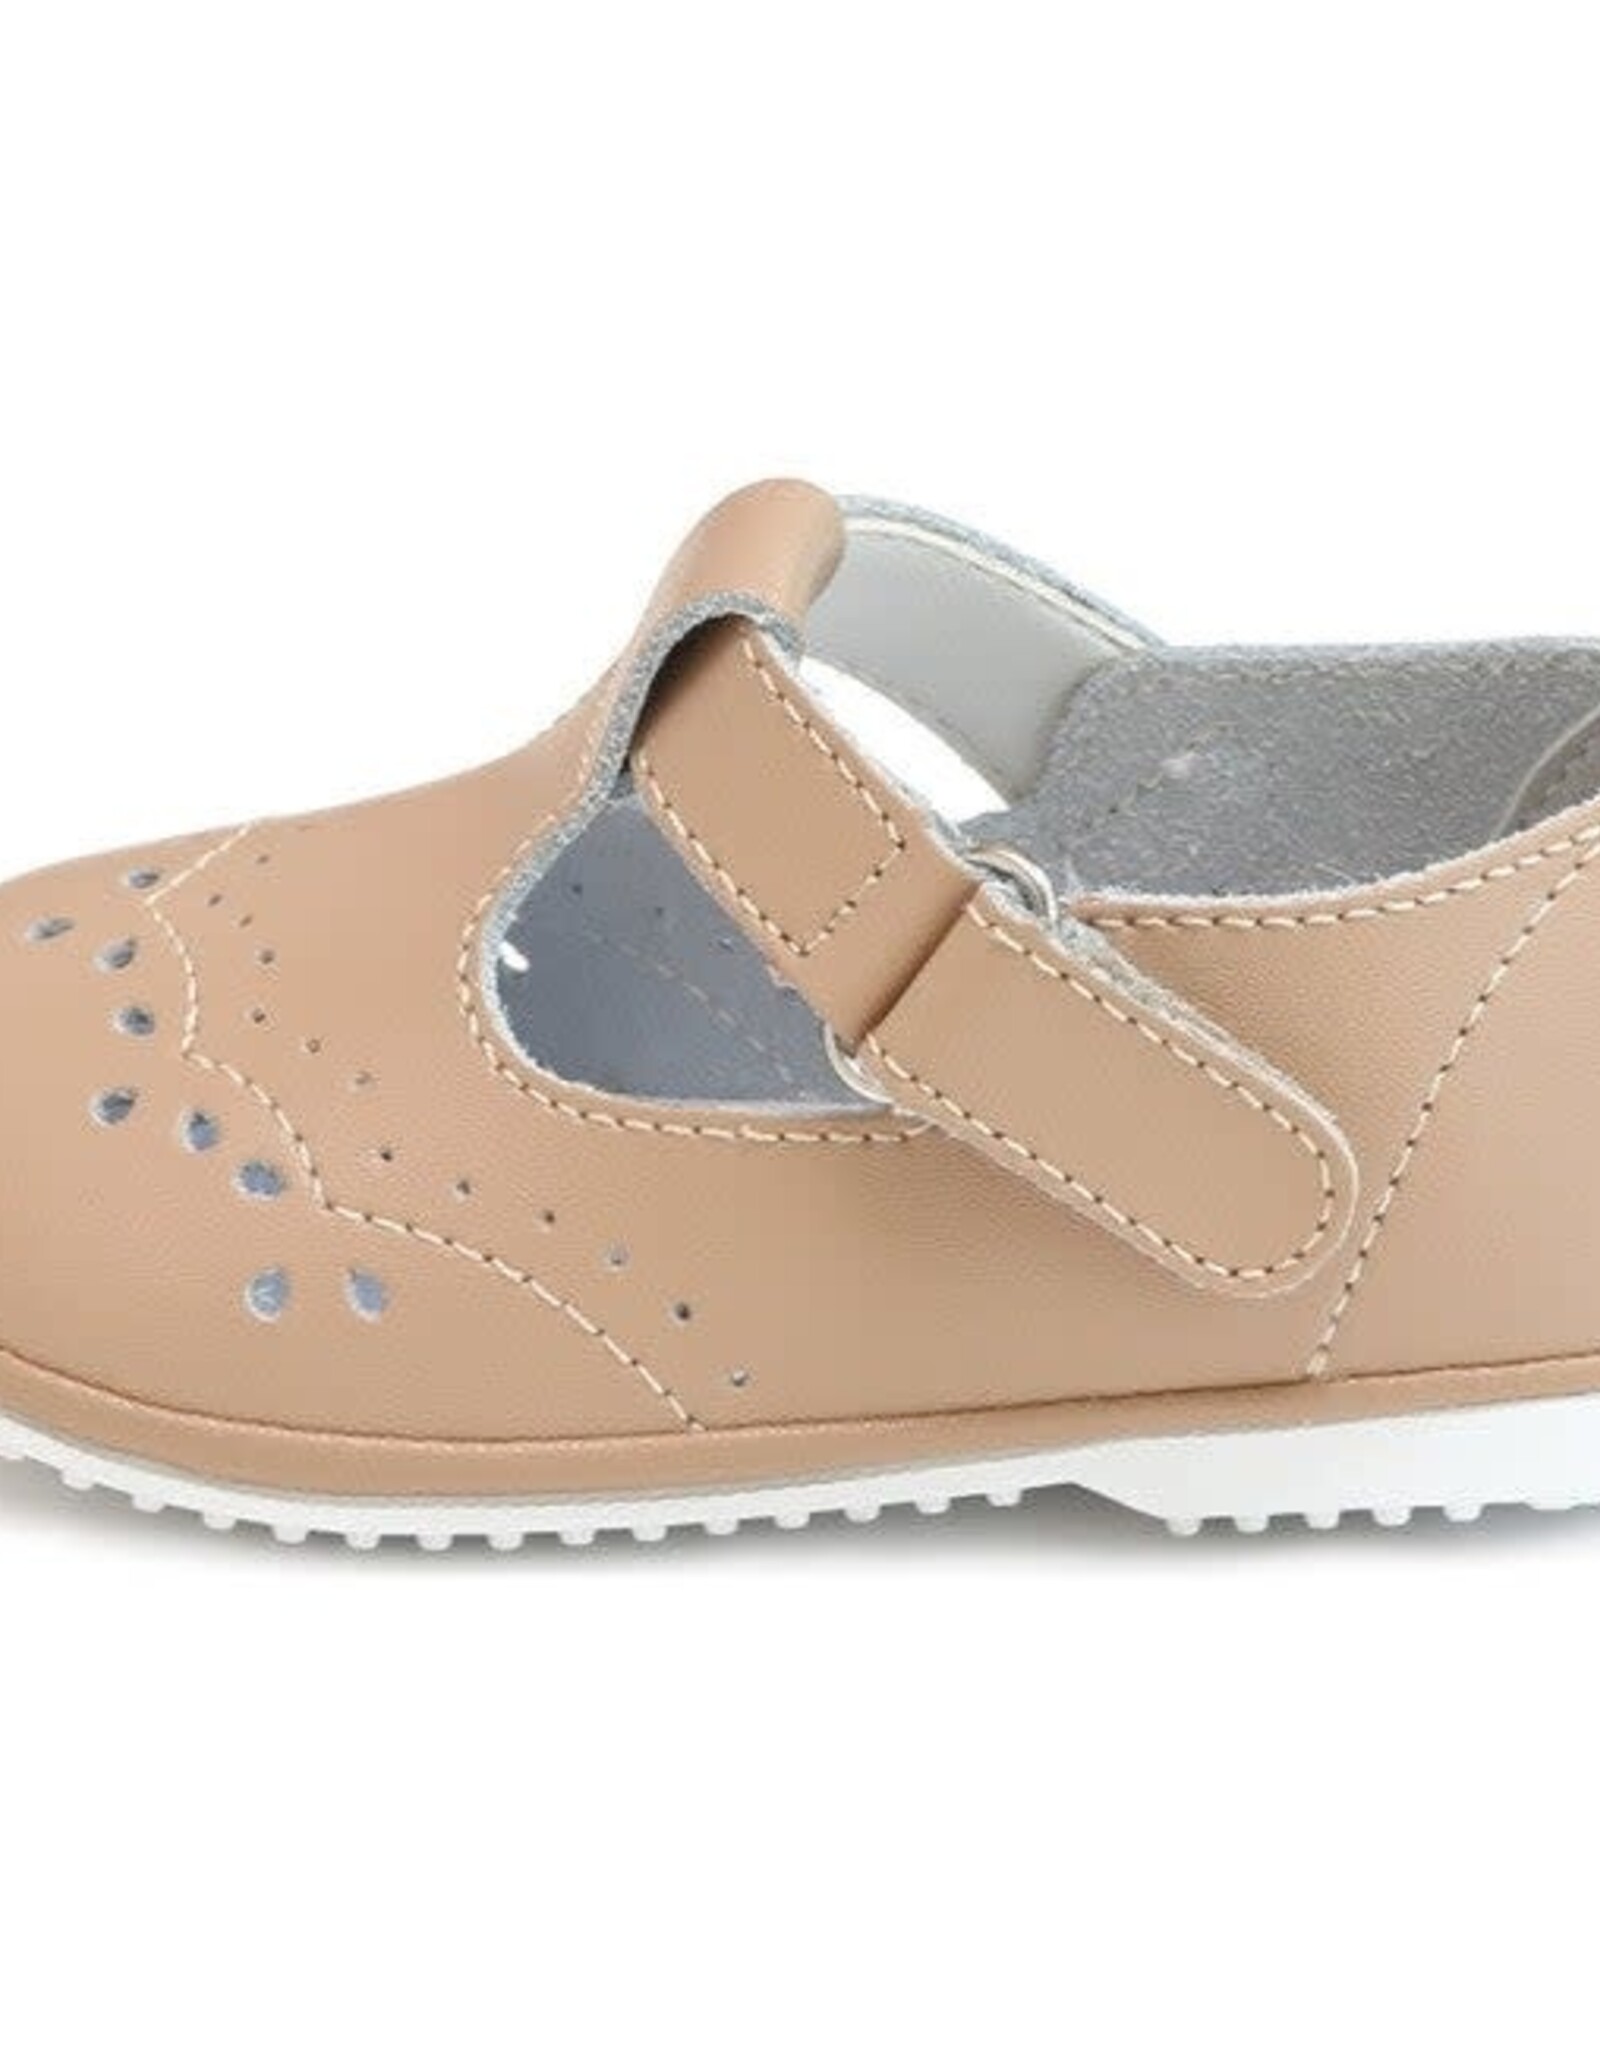 L'AMOUR Birdie T- Strap Stitched Mary Jane in Latte